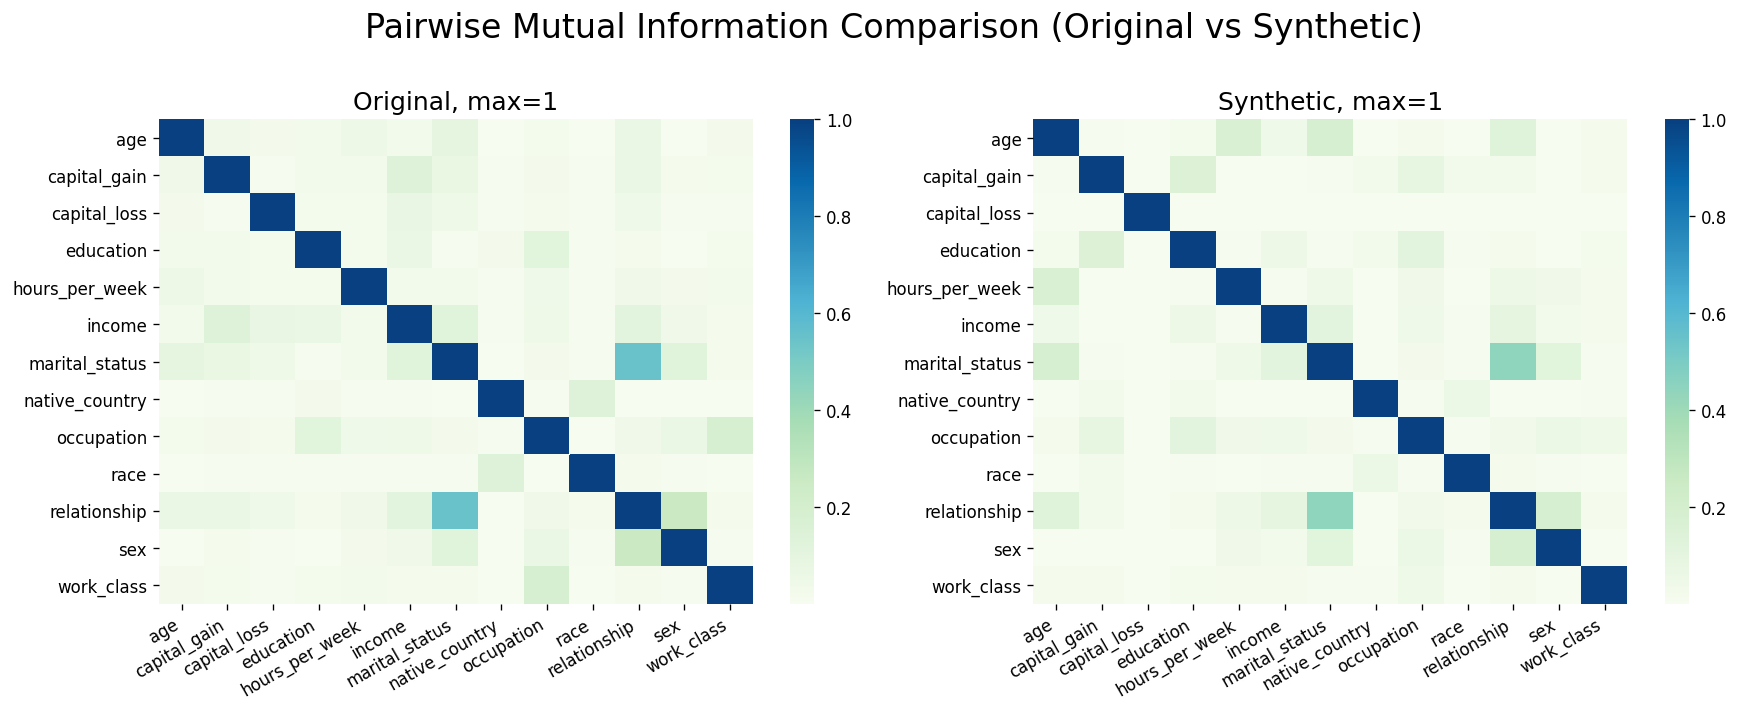 Side by side comparison of mutual information between original and synthetic data features